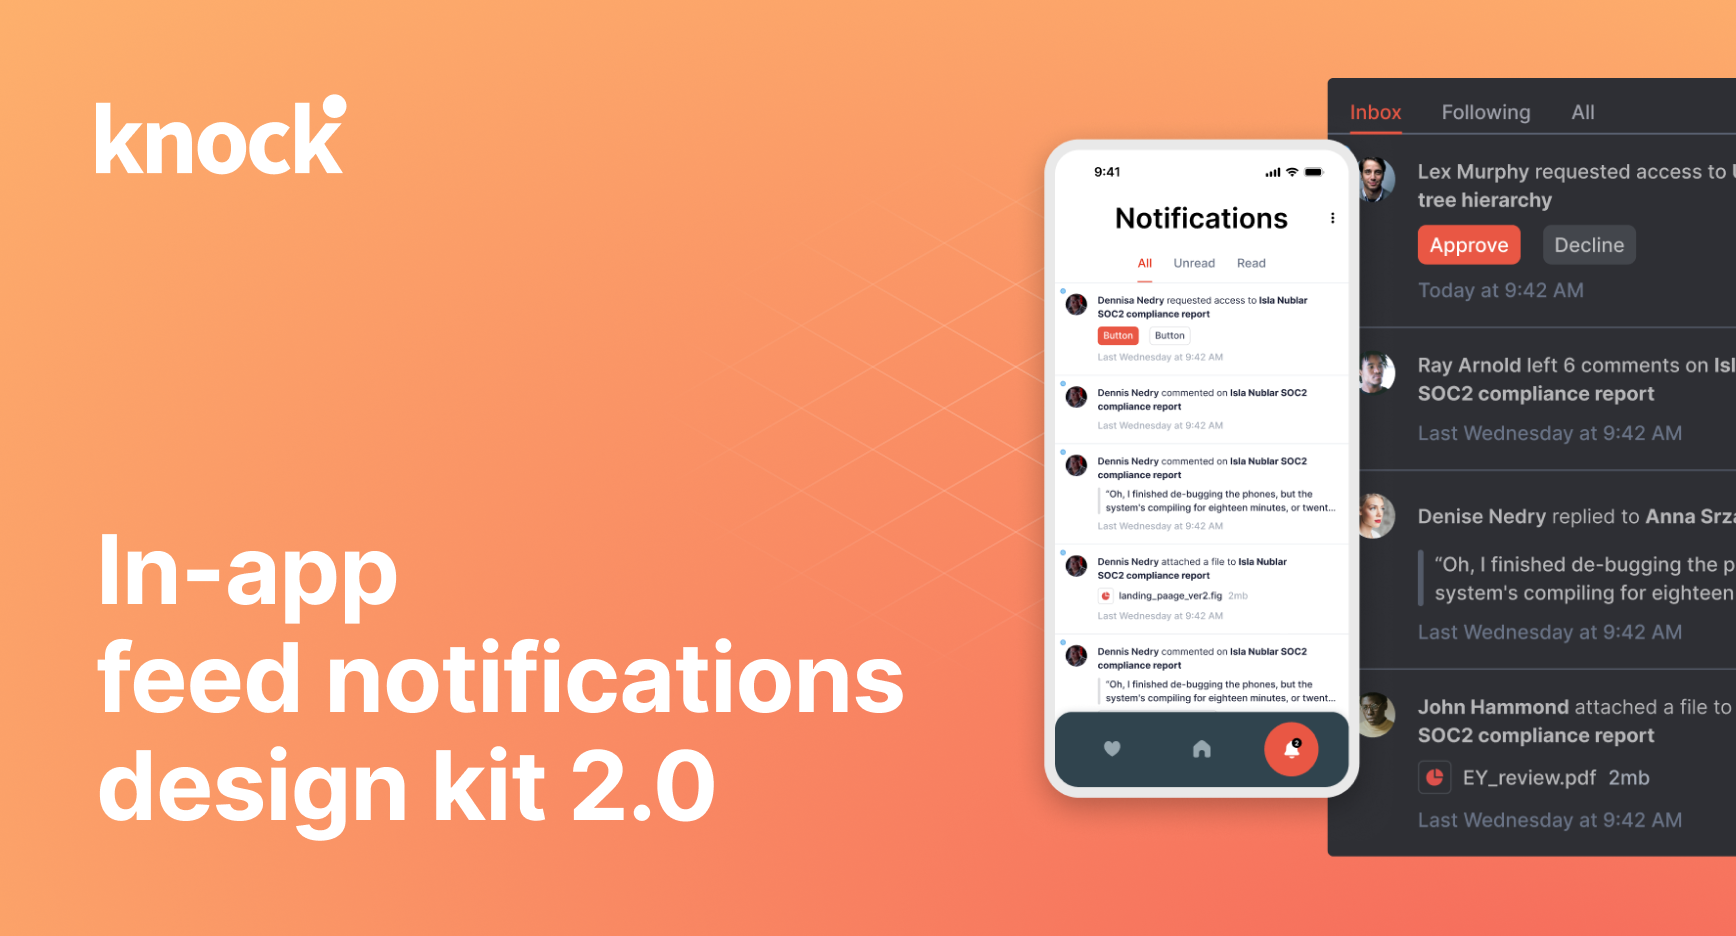 Announcing: in-app feed notifications design kit 2.0